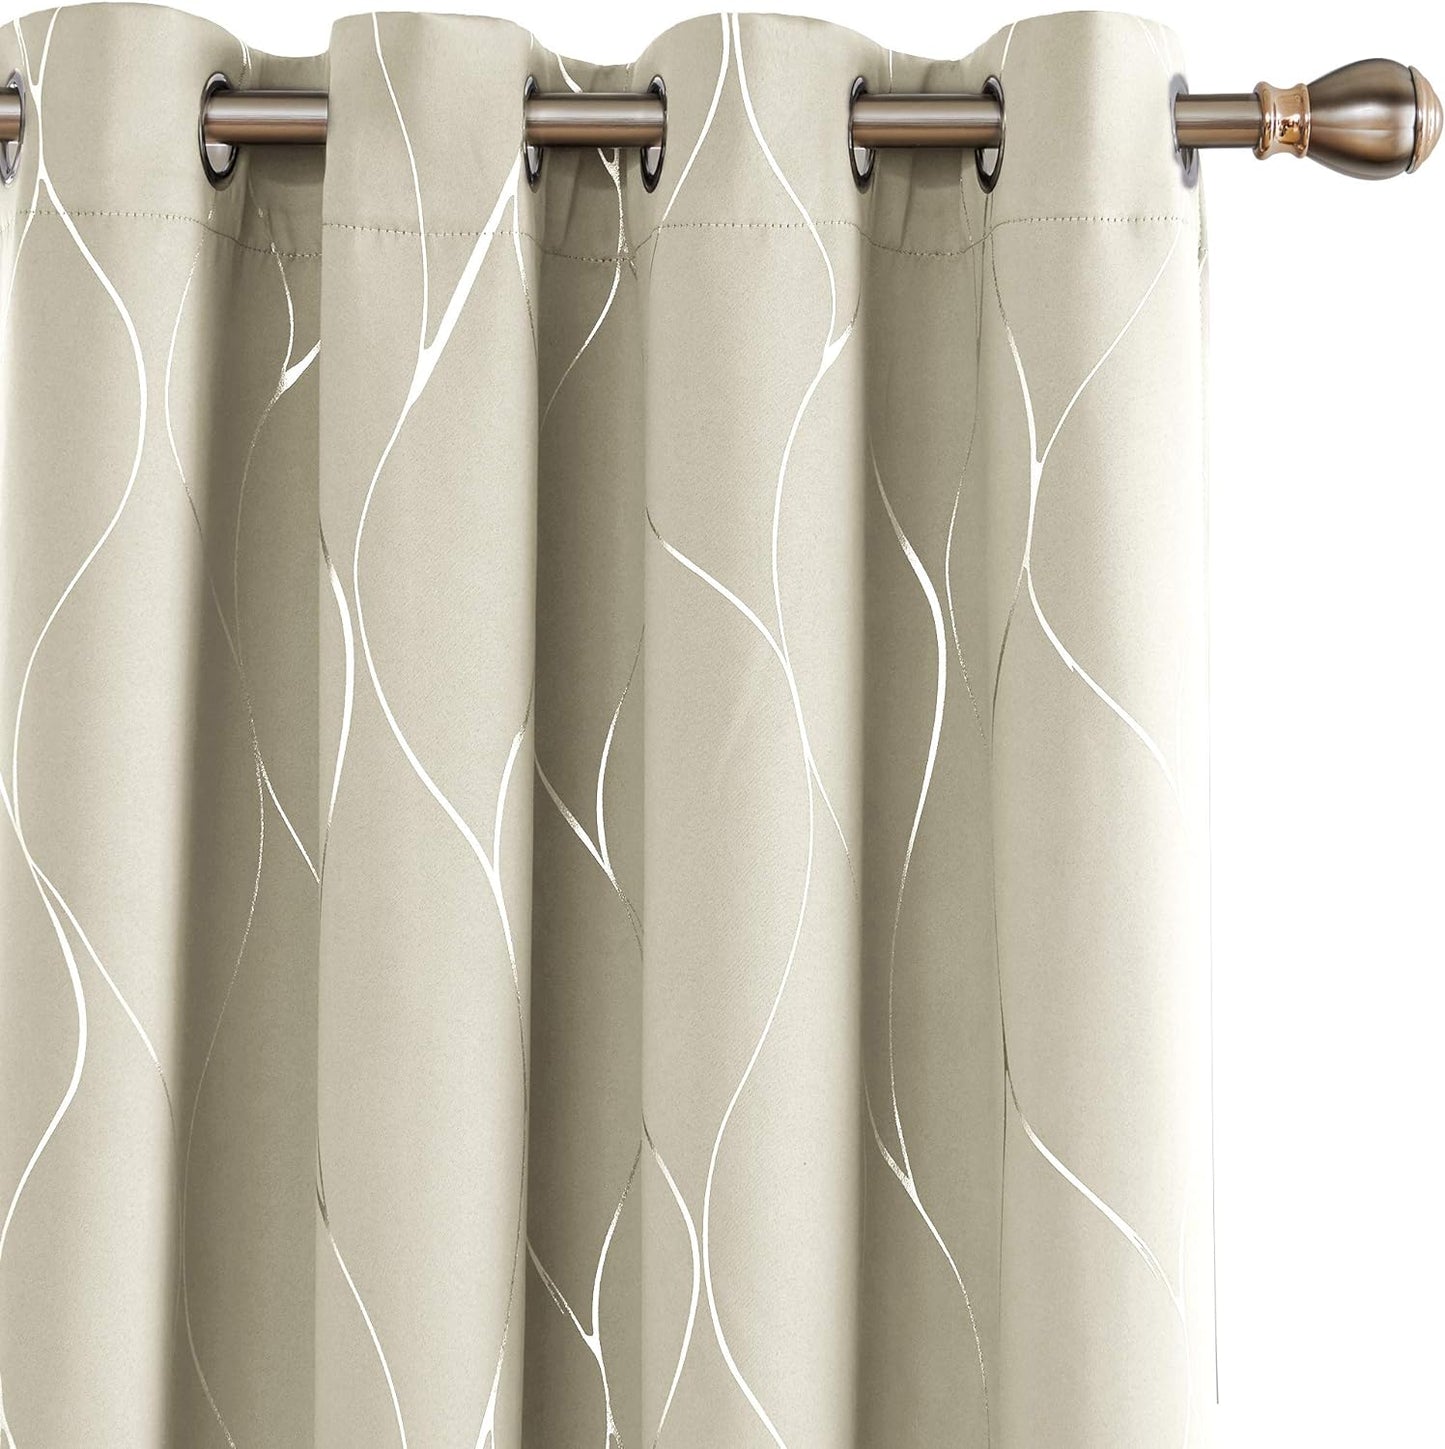 Deconovo Blackout Curtains with Foil Wave Pattern, Grommet Curtain Room Darkening Window Panels, Thermal Insulated Curtain Drapes for Nursery Room (42W X 54L Inch, 2 Panels, Turquoise)  DECONOVO Light Beige W52 X L72 